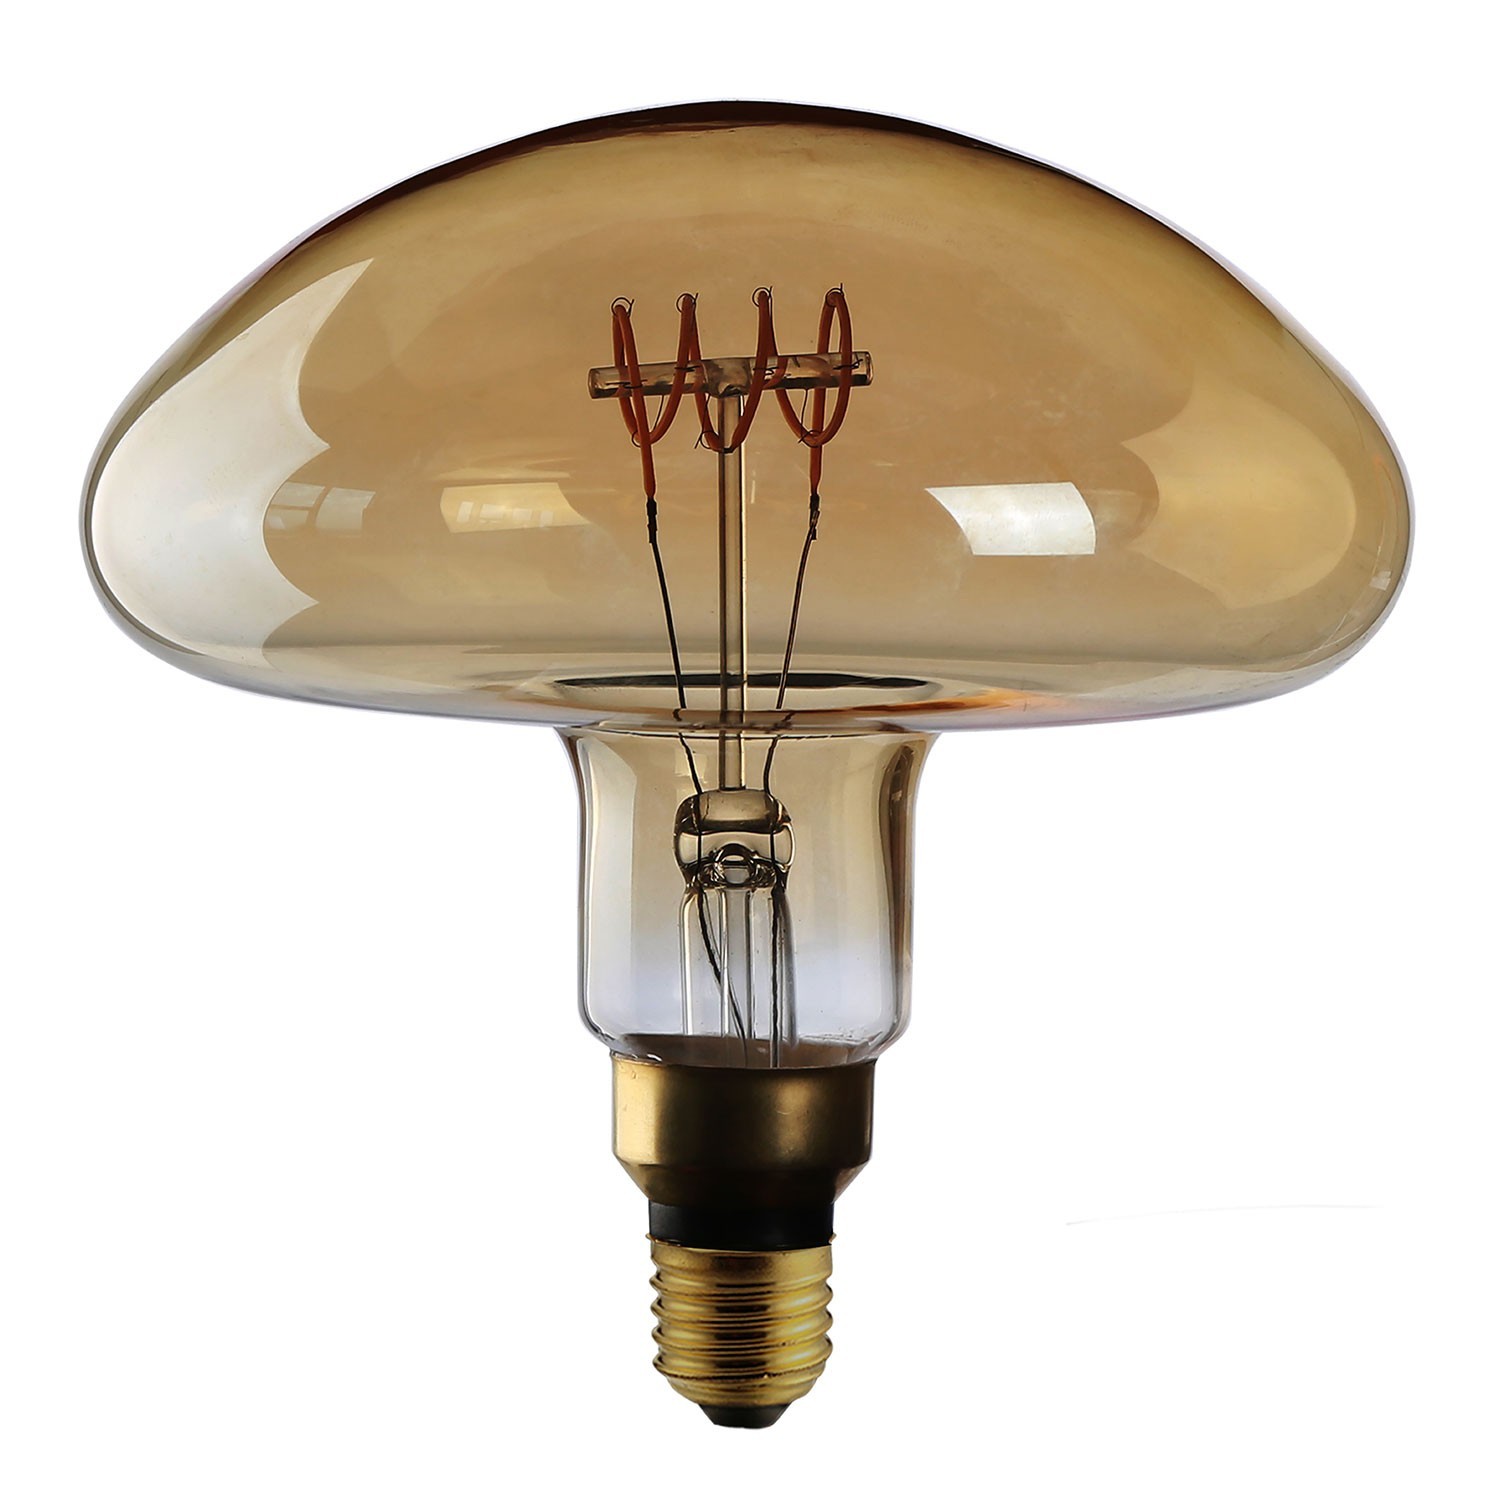 Posaluce Mushroom Wooden Table Lamp with two-pin plug